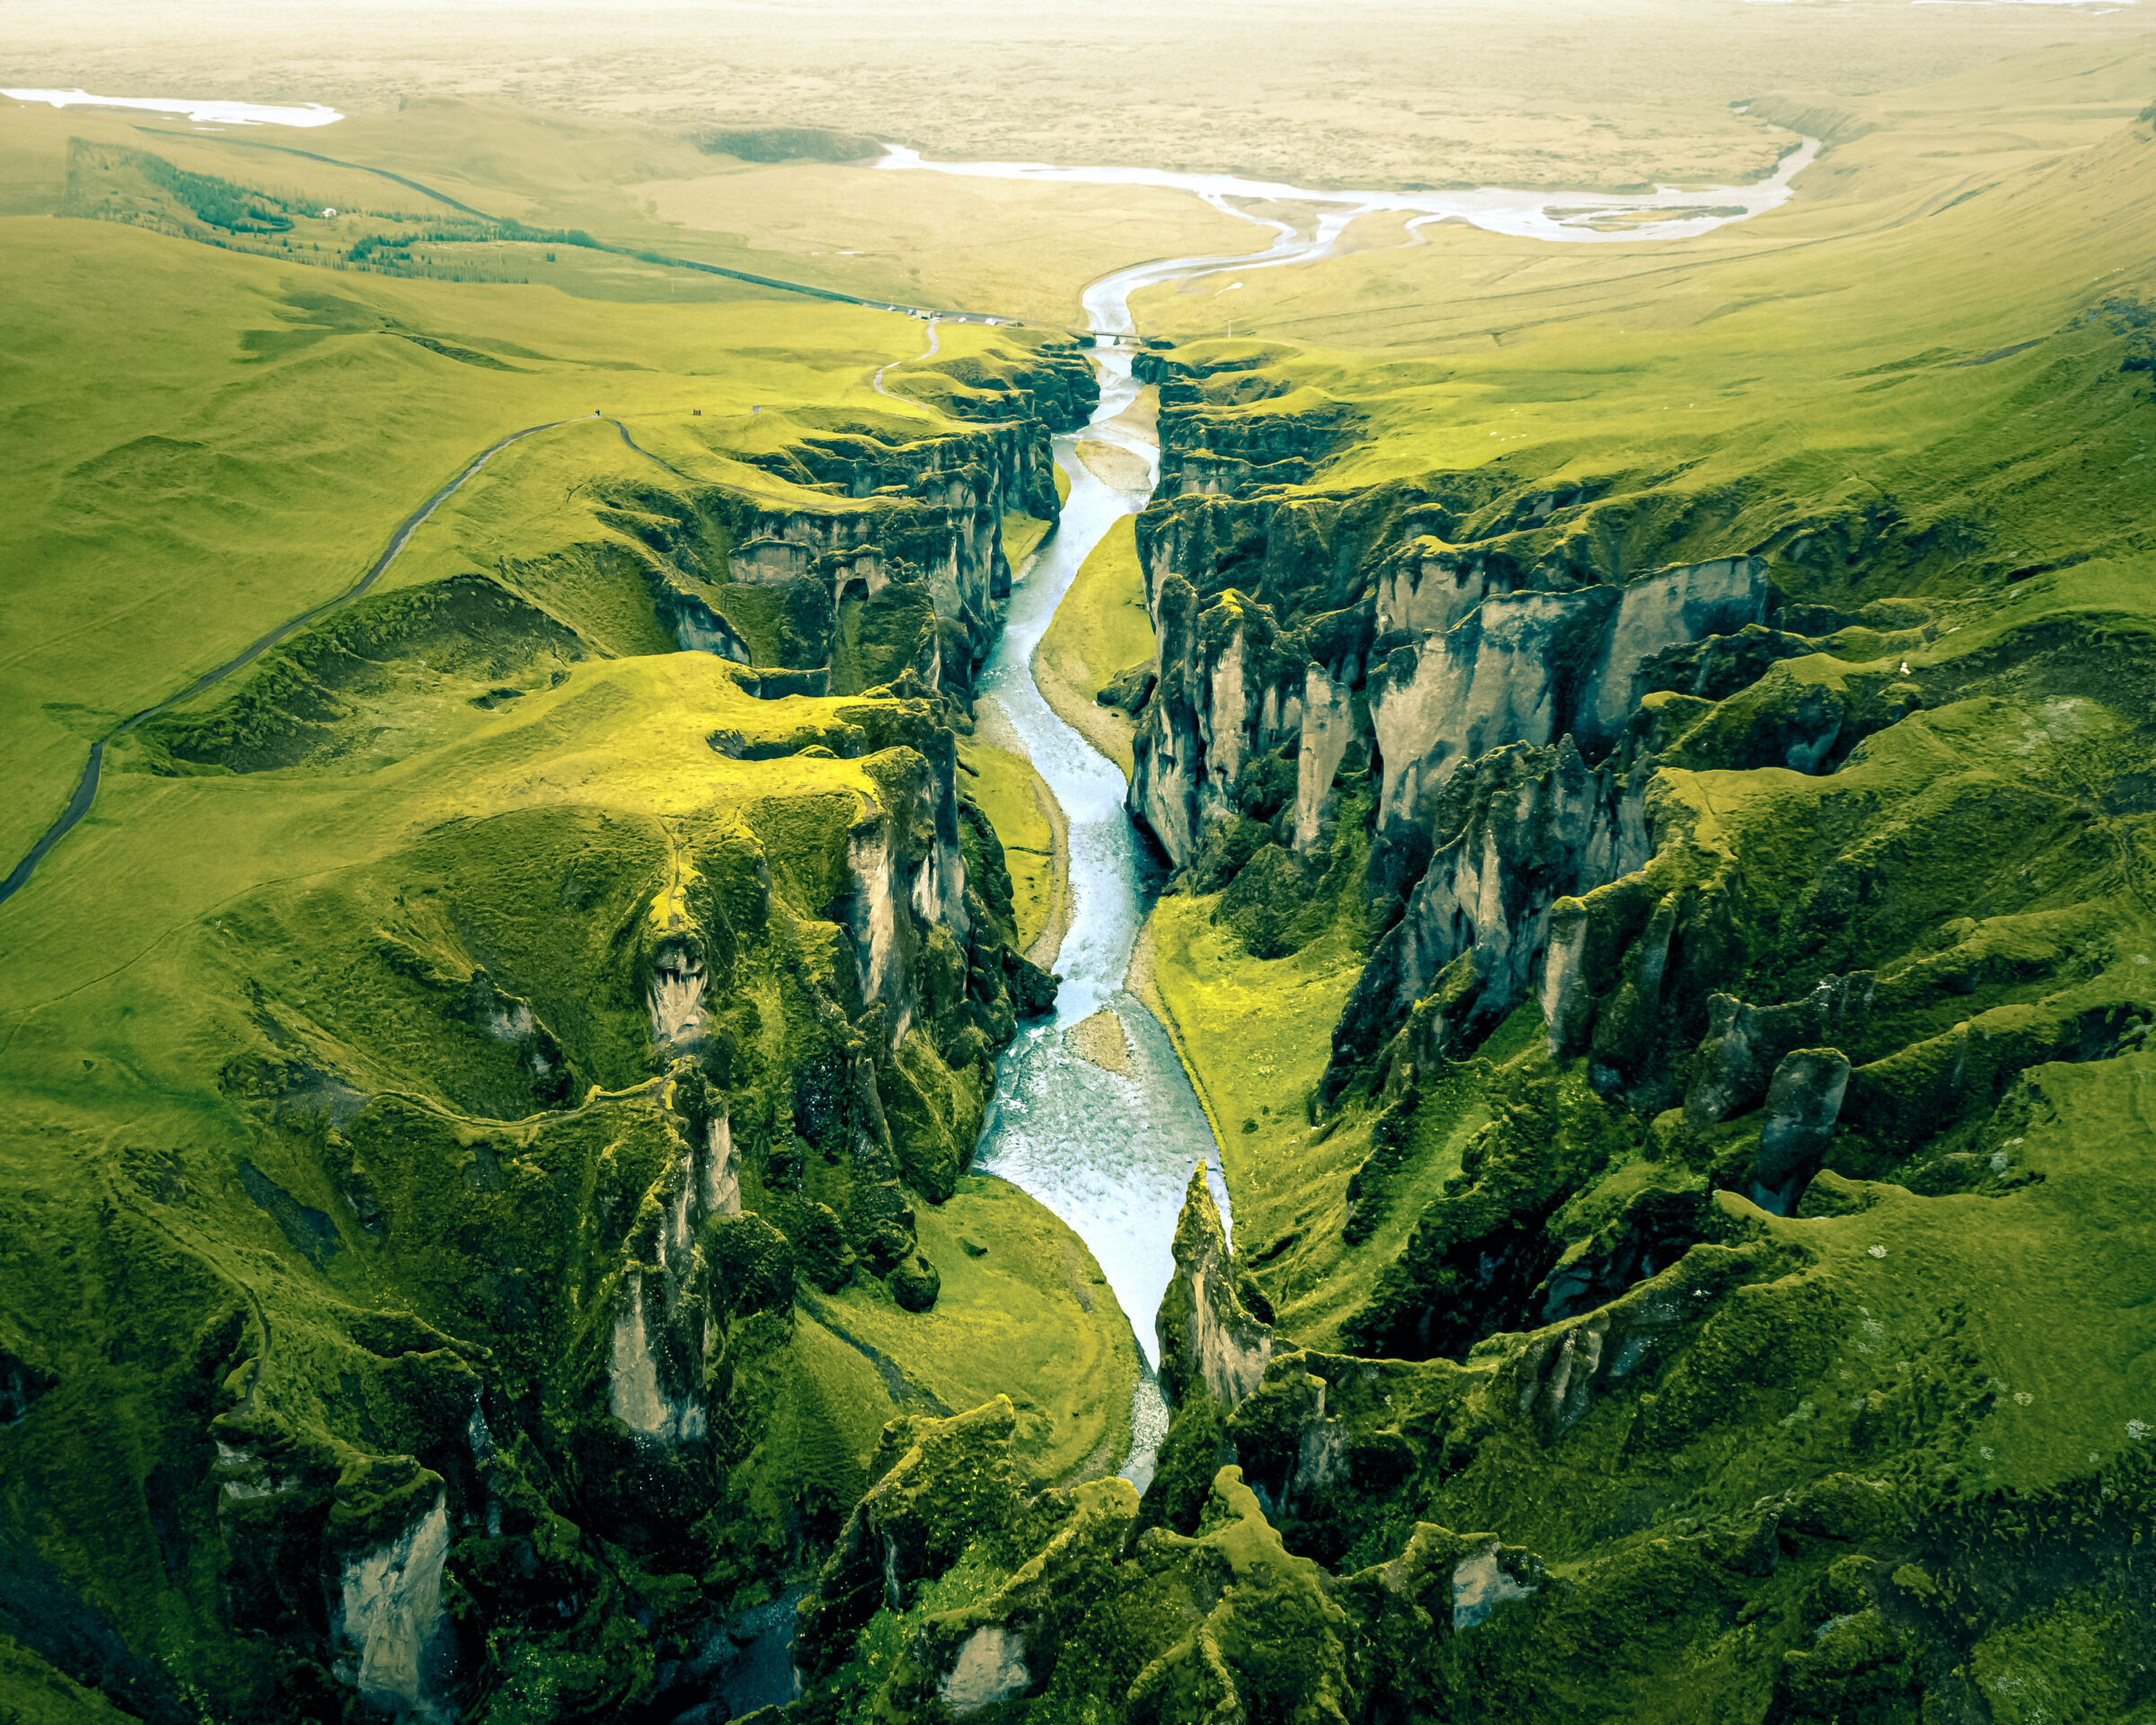 Unique rugged landscape of Fjaðrárgljúfur canyon covered by beautiful green moss, located in southern Iceland. Aerial shot.